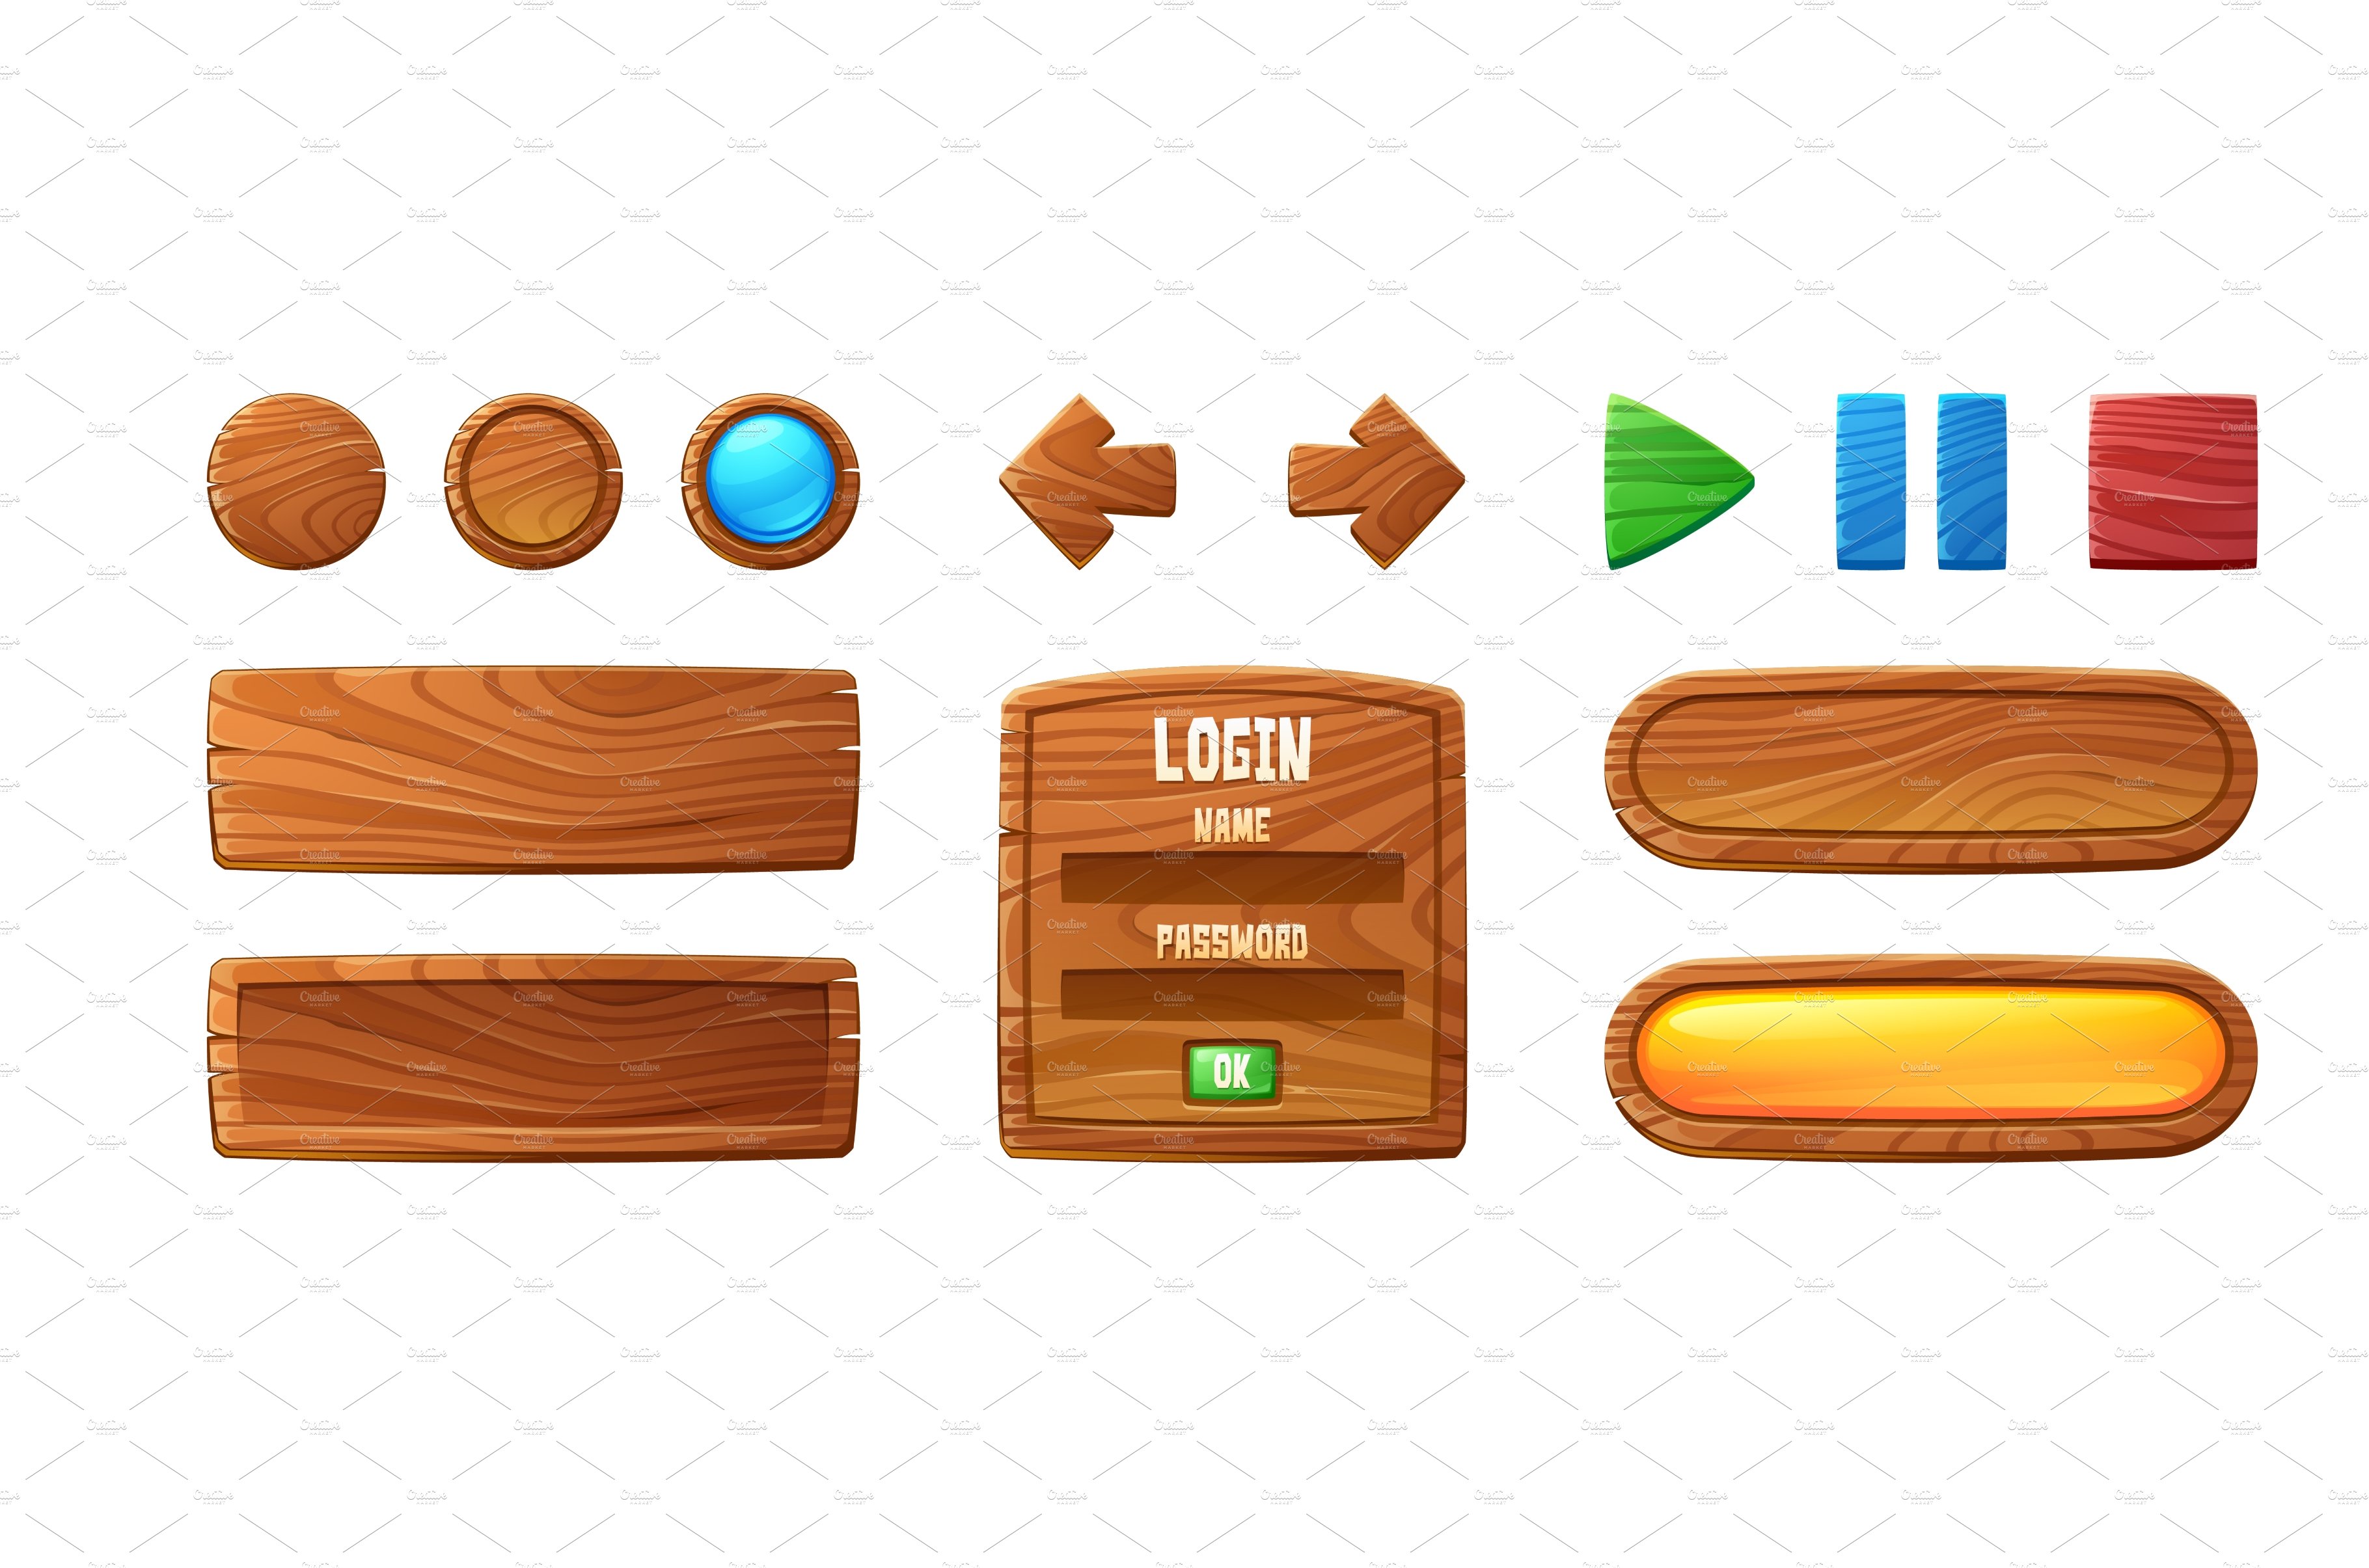 Wooden buttons for ui game, gui cover image.